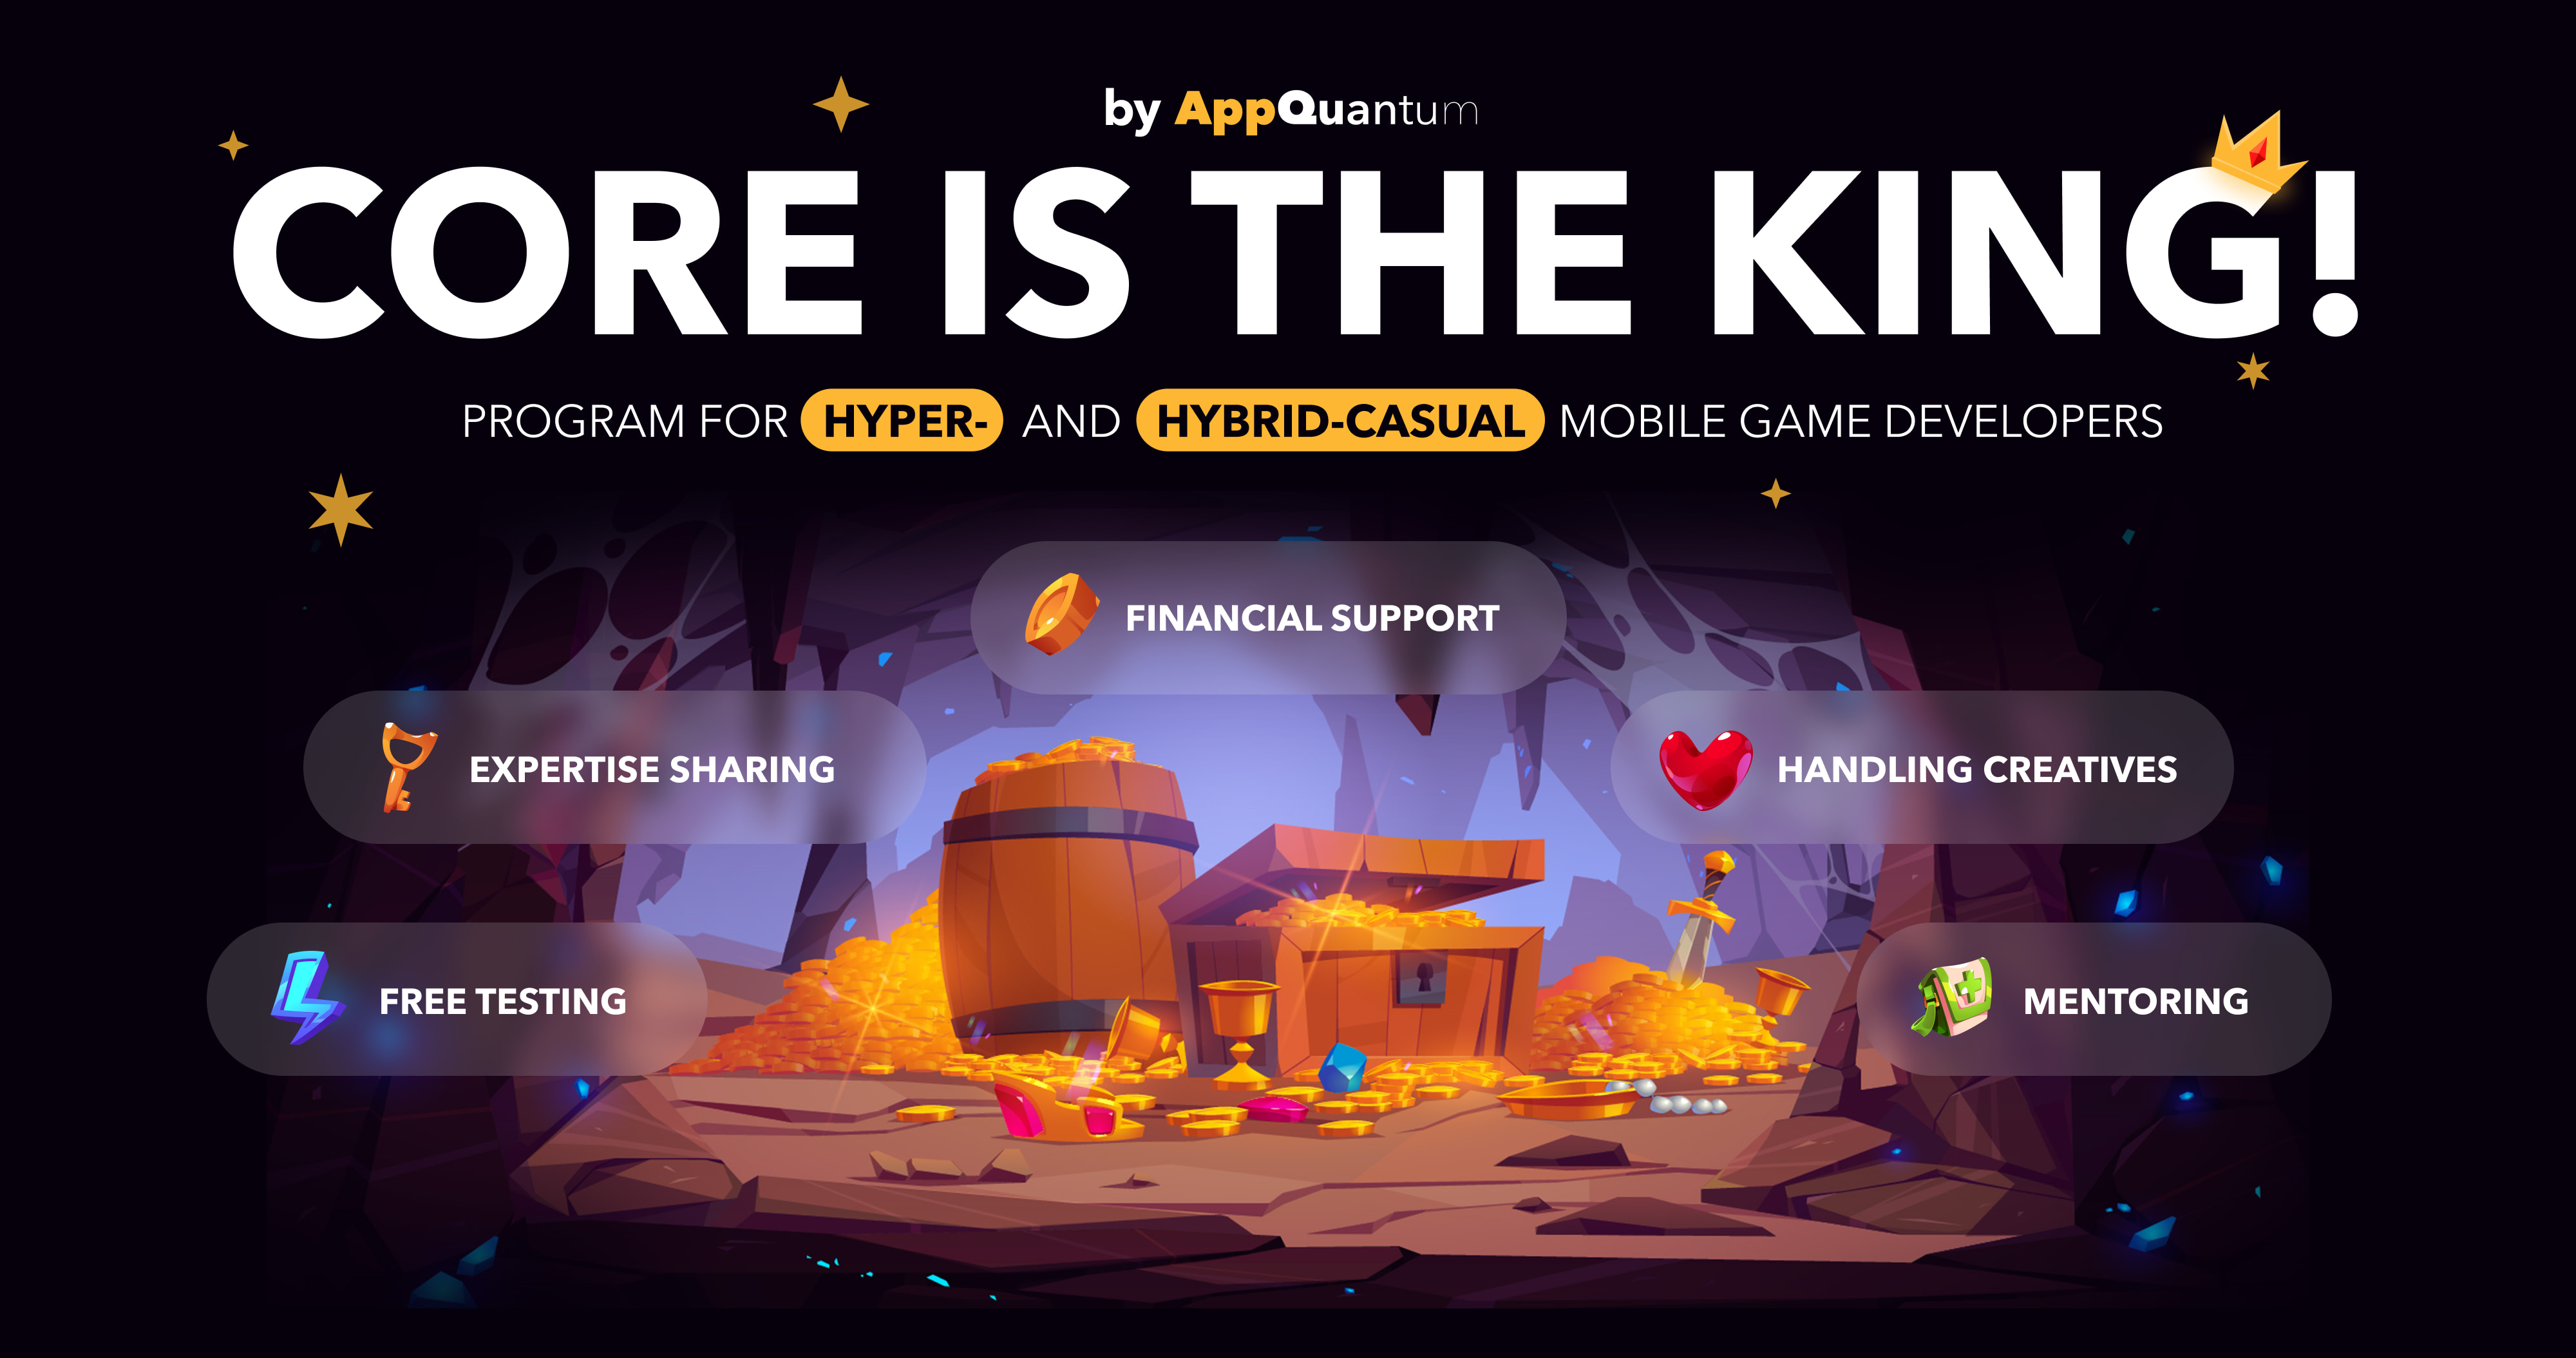 AppQuantum Introduces Core is the King! Program for Hyper- and Hybrid-Casual Mobile Game Developers